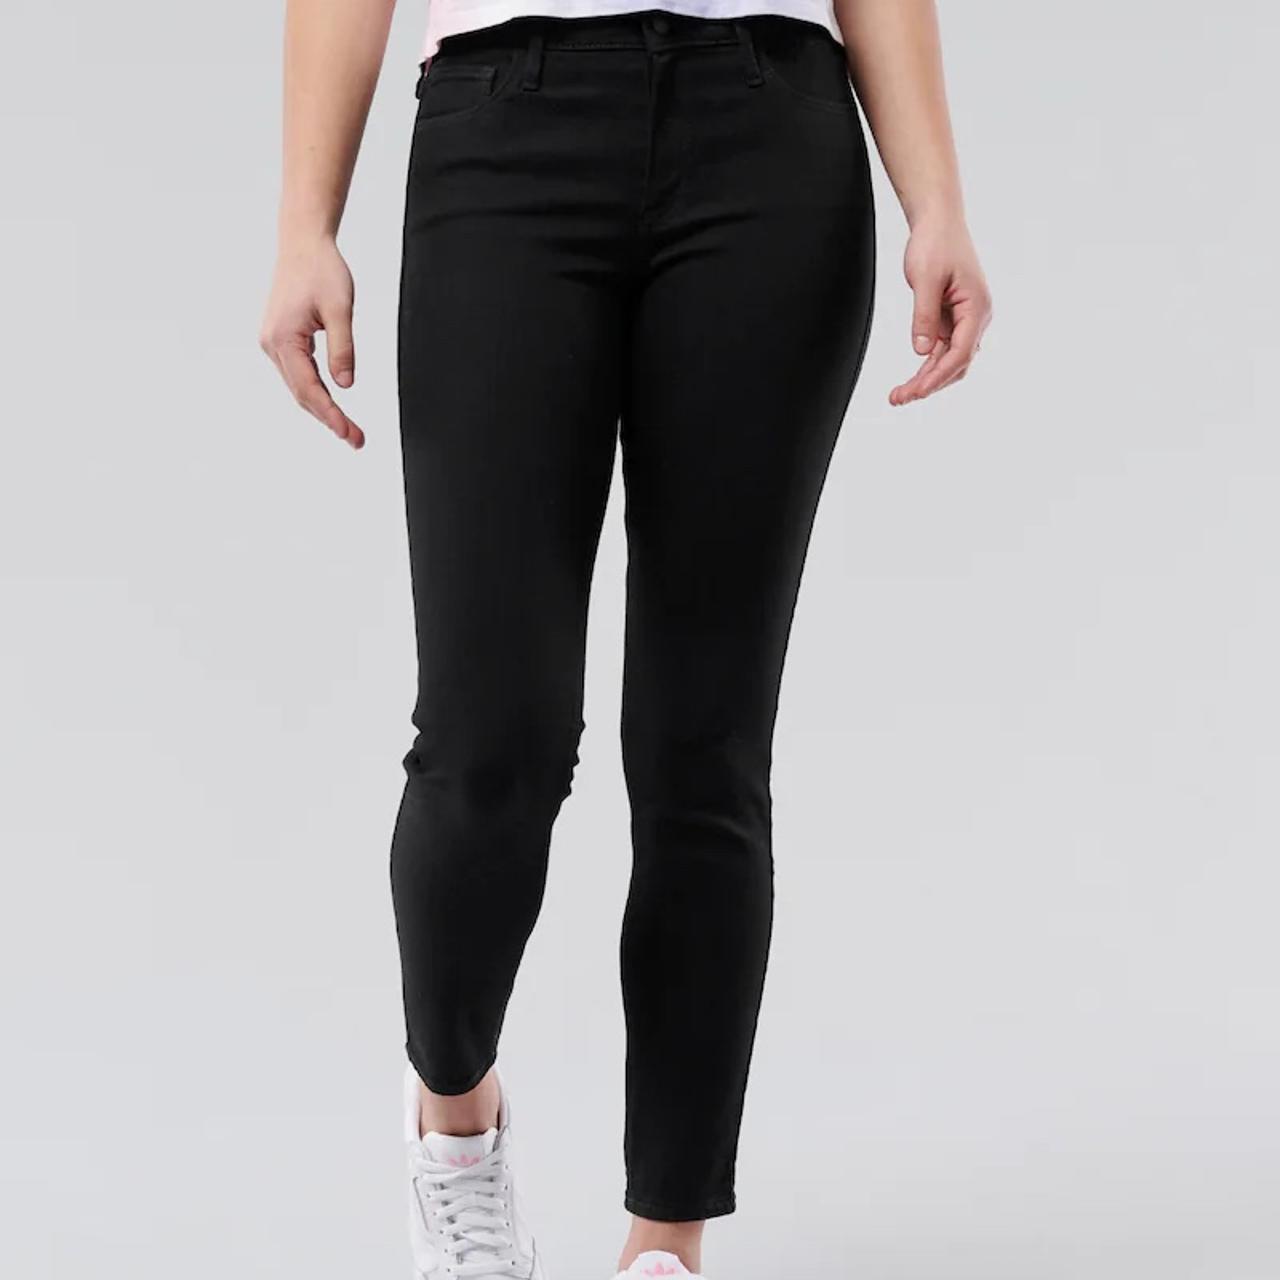 Hollister low rise jean legging :) these pants